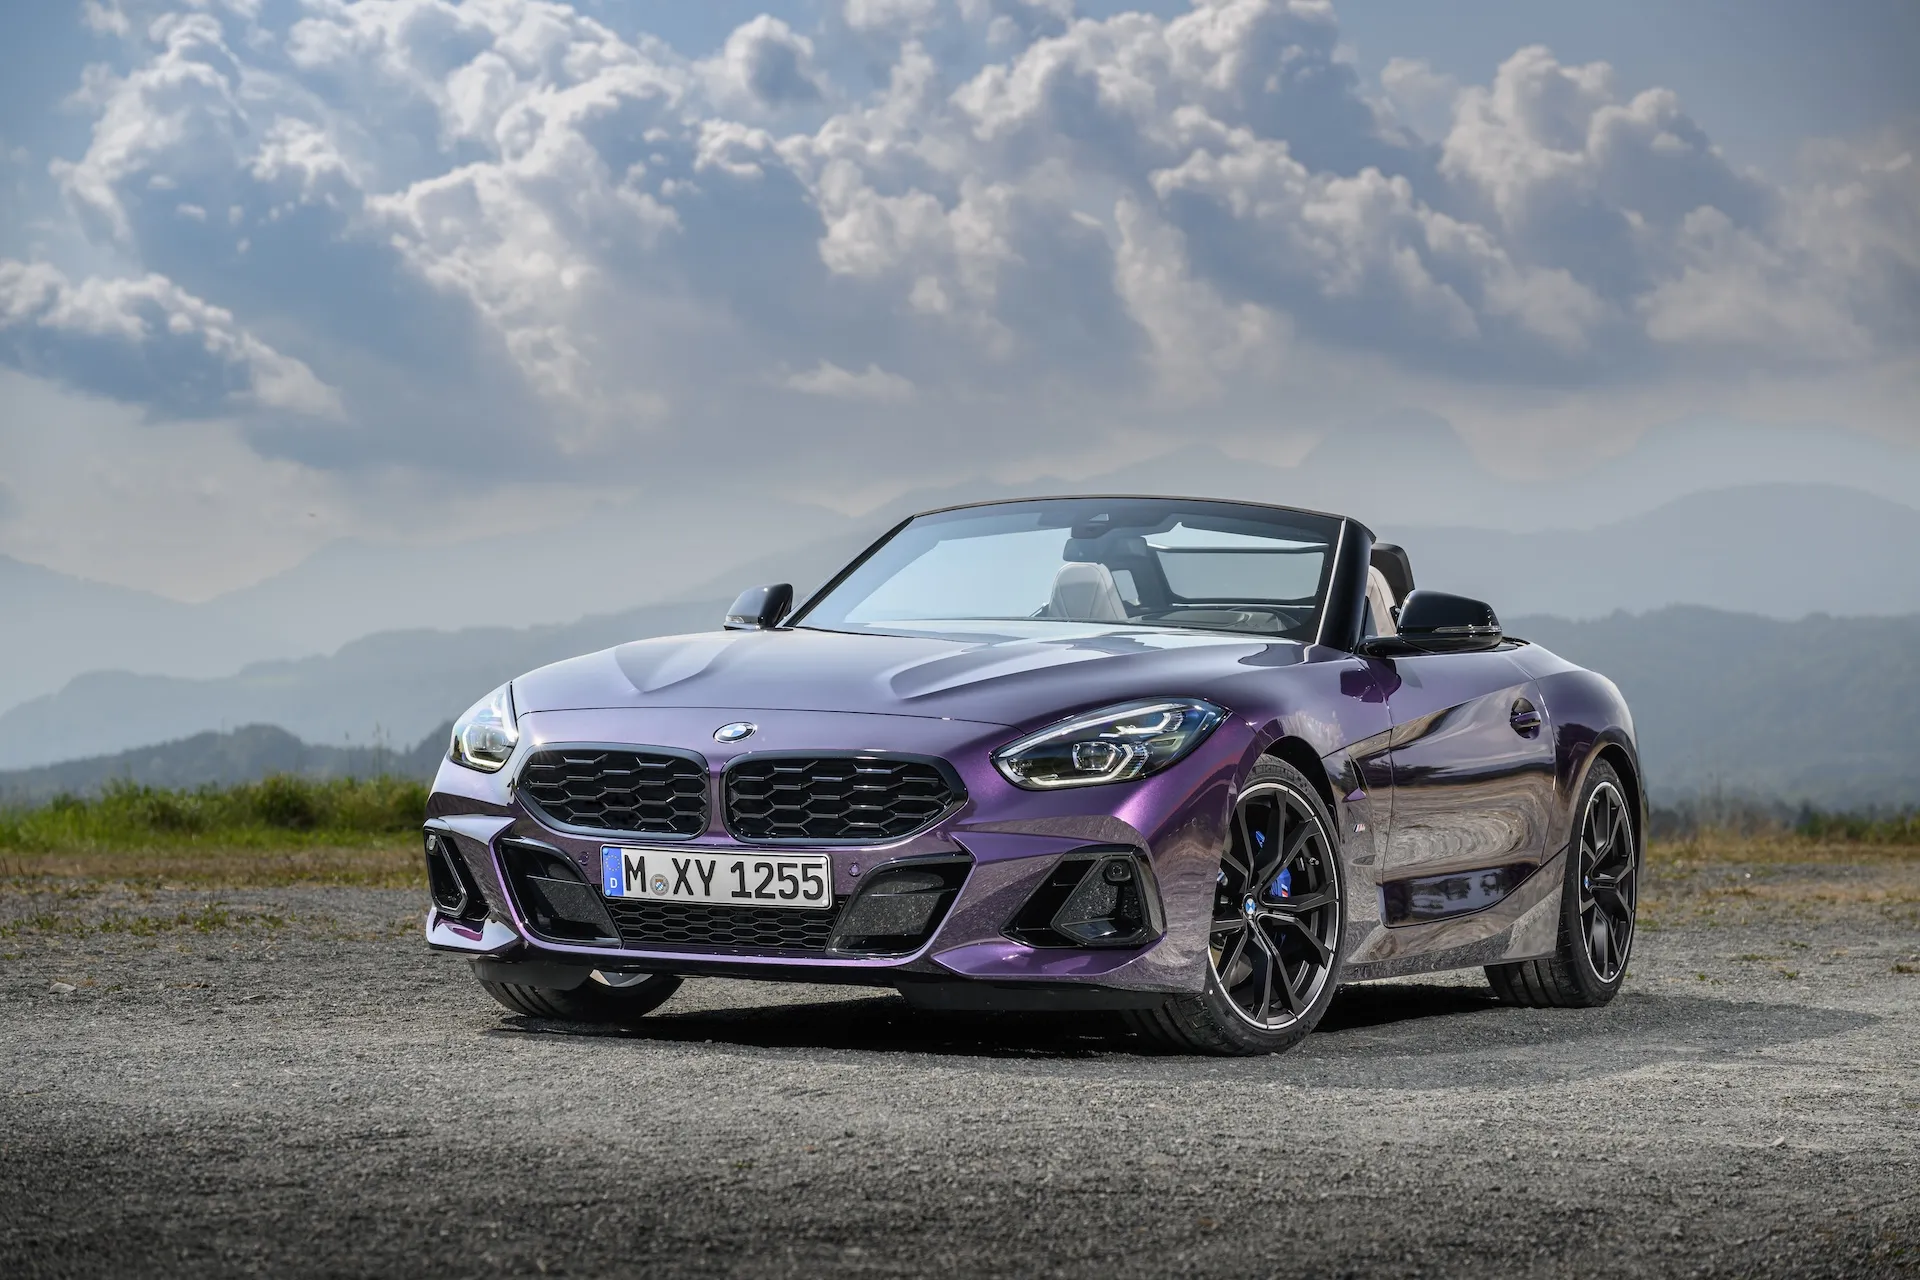 BMW Z4 may not get a repeat Auto Recent